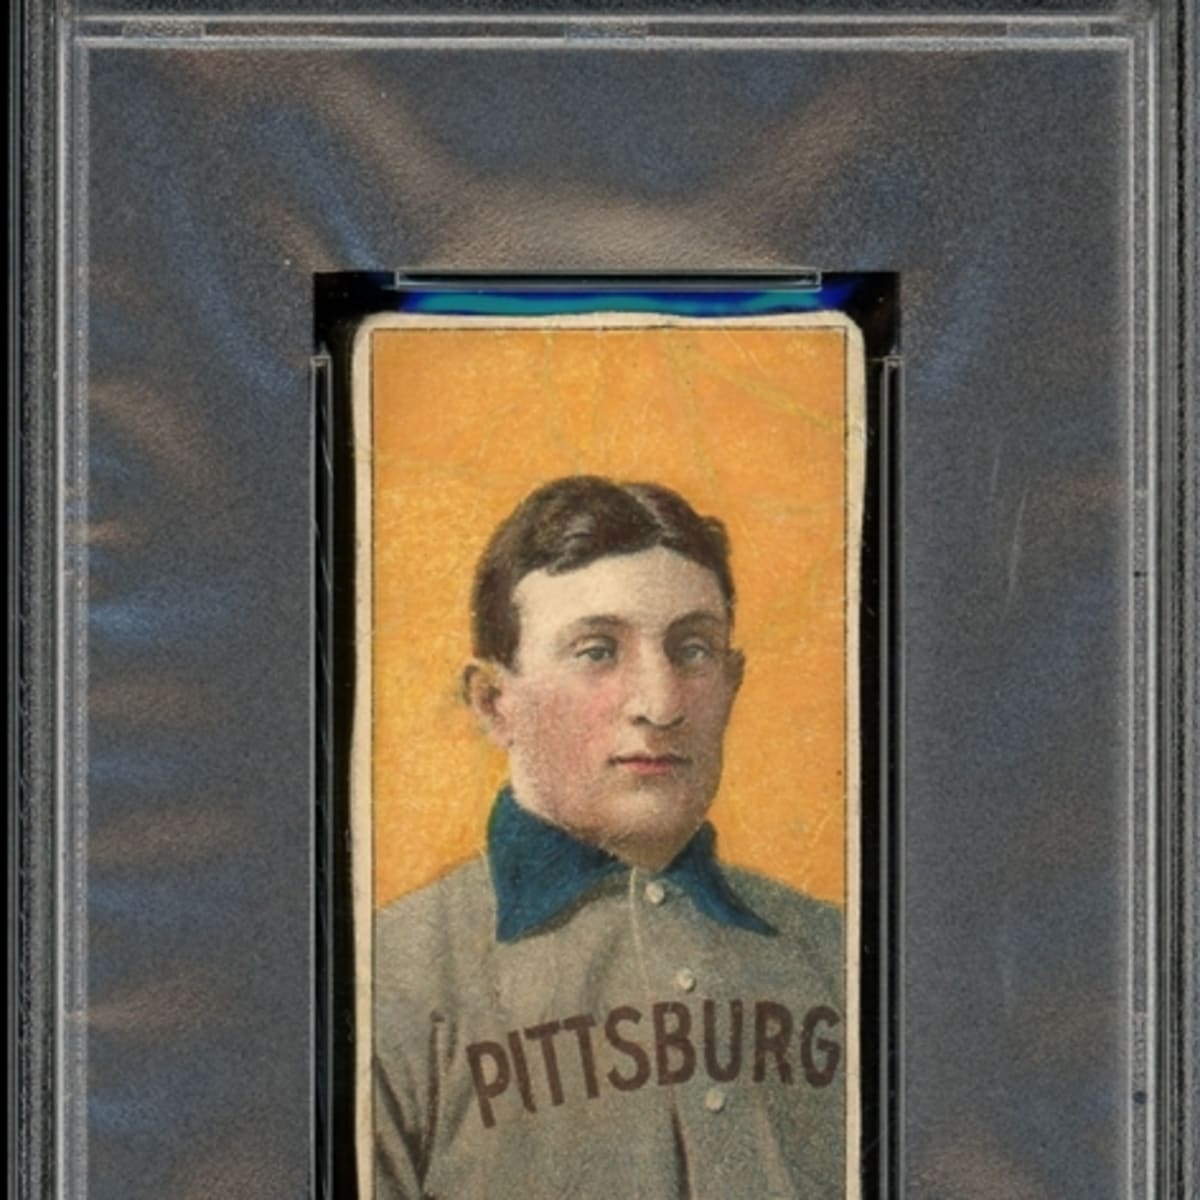 Low-grade T206 Honus Wagner card sells for $1.96M at Mile High Card Company  - Sports Collectors Digest